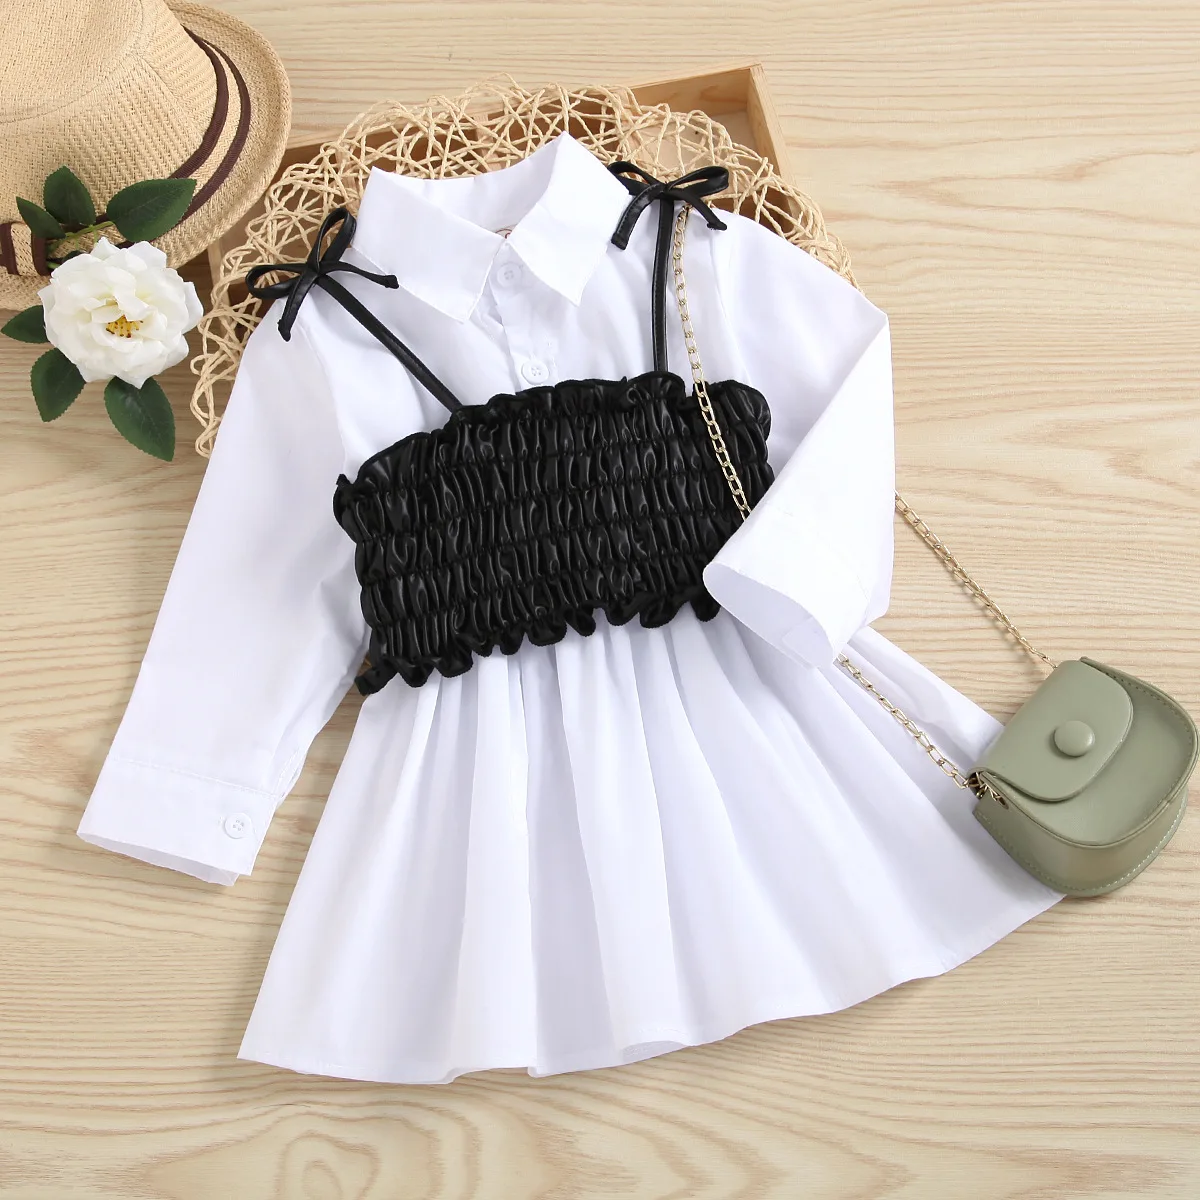 

2021 New Fall Children Toddler Girl White Long Sleeved Turn Down Collar Blouse +Black Ruffle Faux Leather Waistband 2-6T, As photos